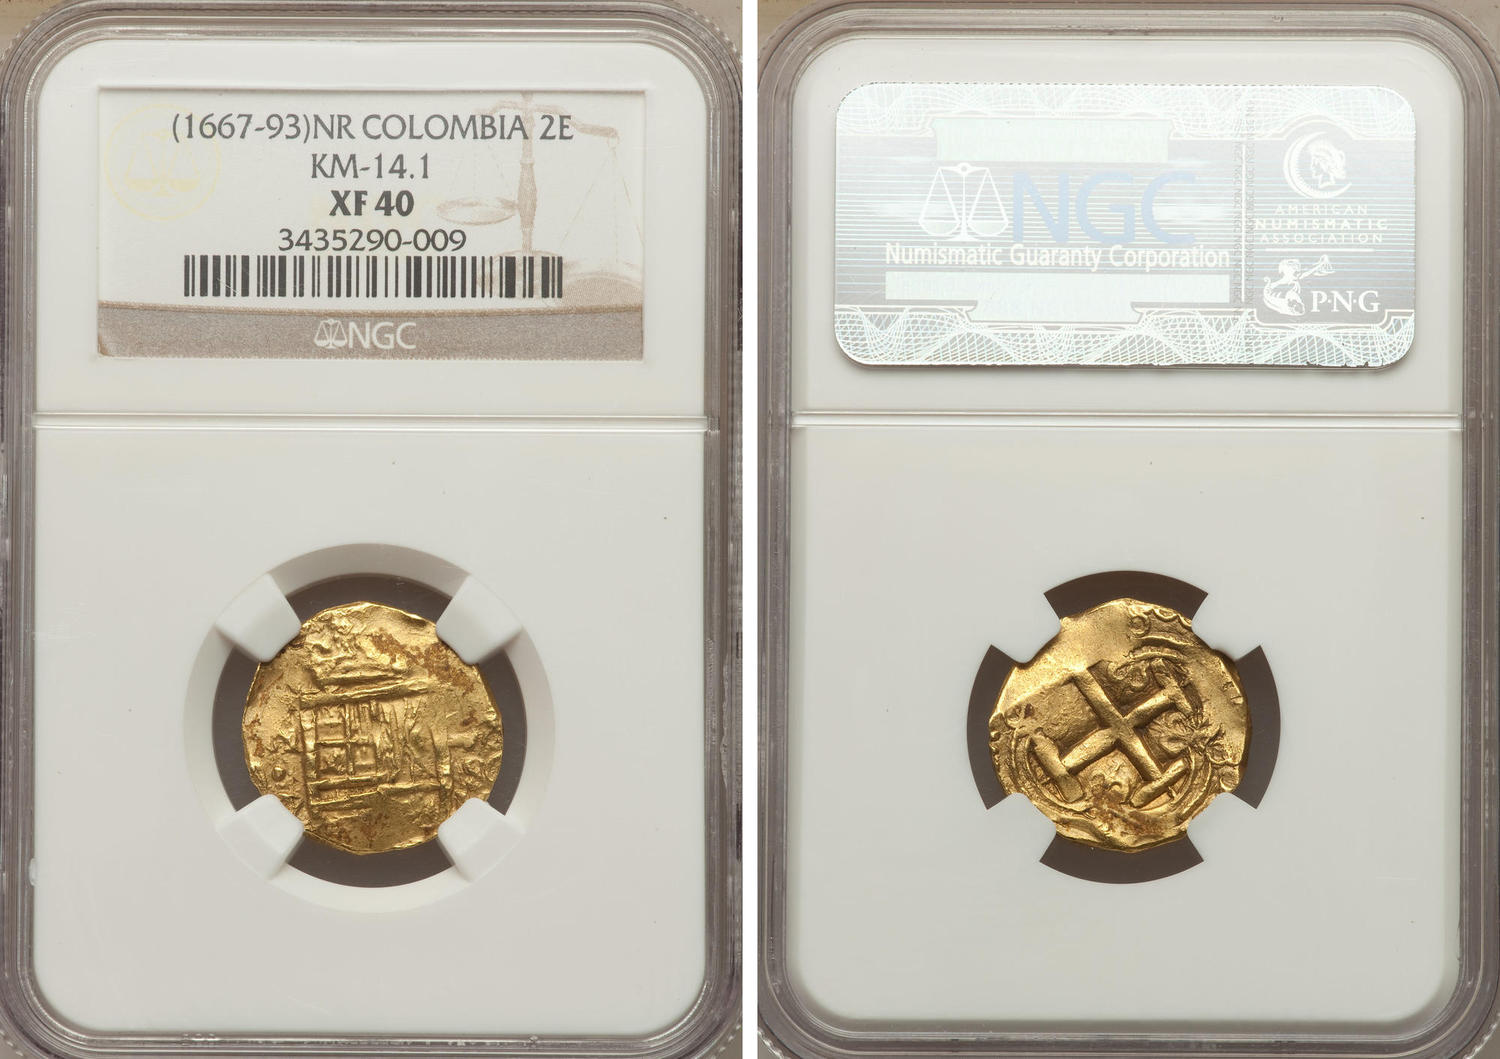 NumisBids: Heritage World Coin Auctions NYINC Signature Sale 3038 